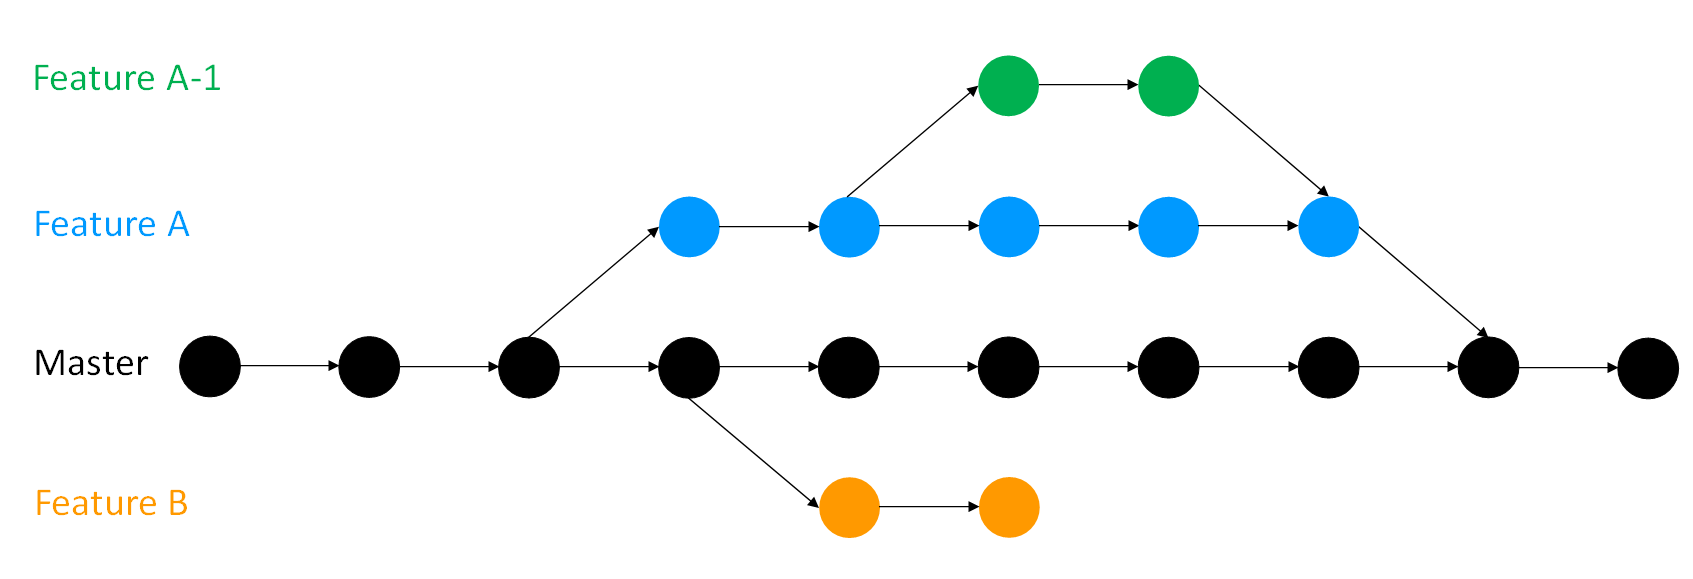 An illustration of branching in Git. There are four branches shown named master, Feature A, Feature B, and Feature A-1. Feature A and B are branches of the master branch, while Feature A-1 is a branch made from Feature A.